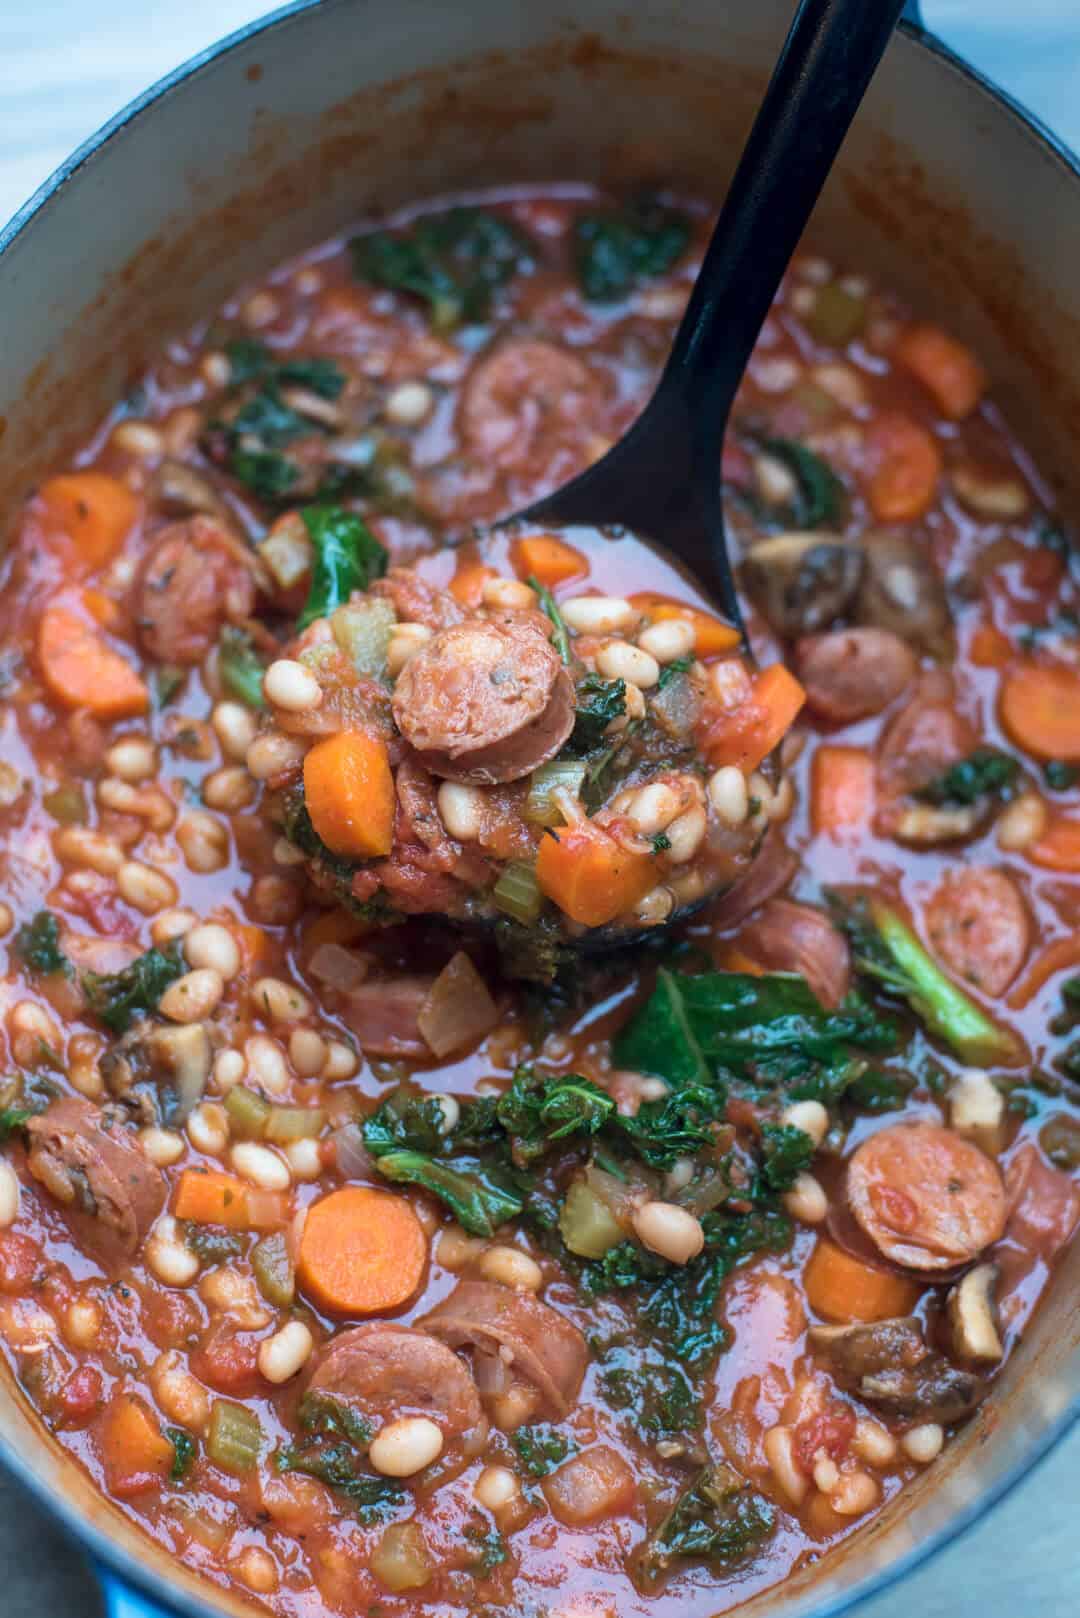 10 Healthy Dinner Recipes on a Budget - Sausage White Bean and Kale Stew